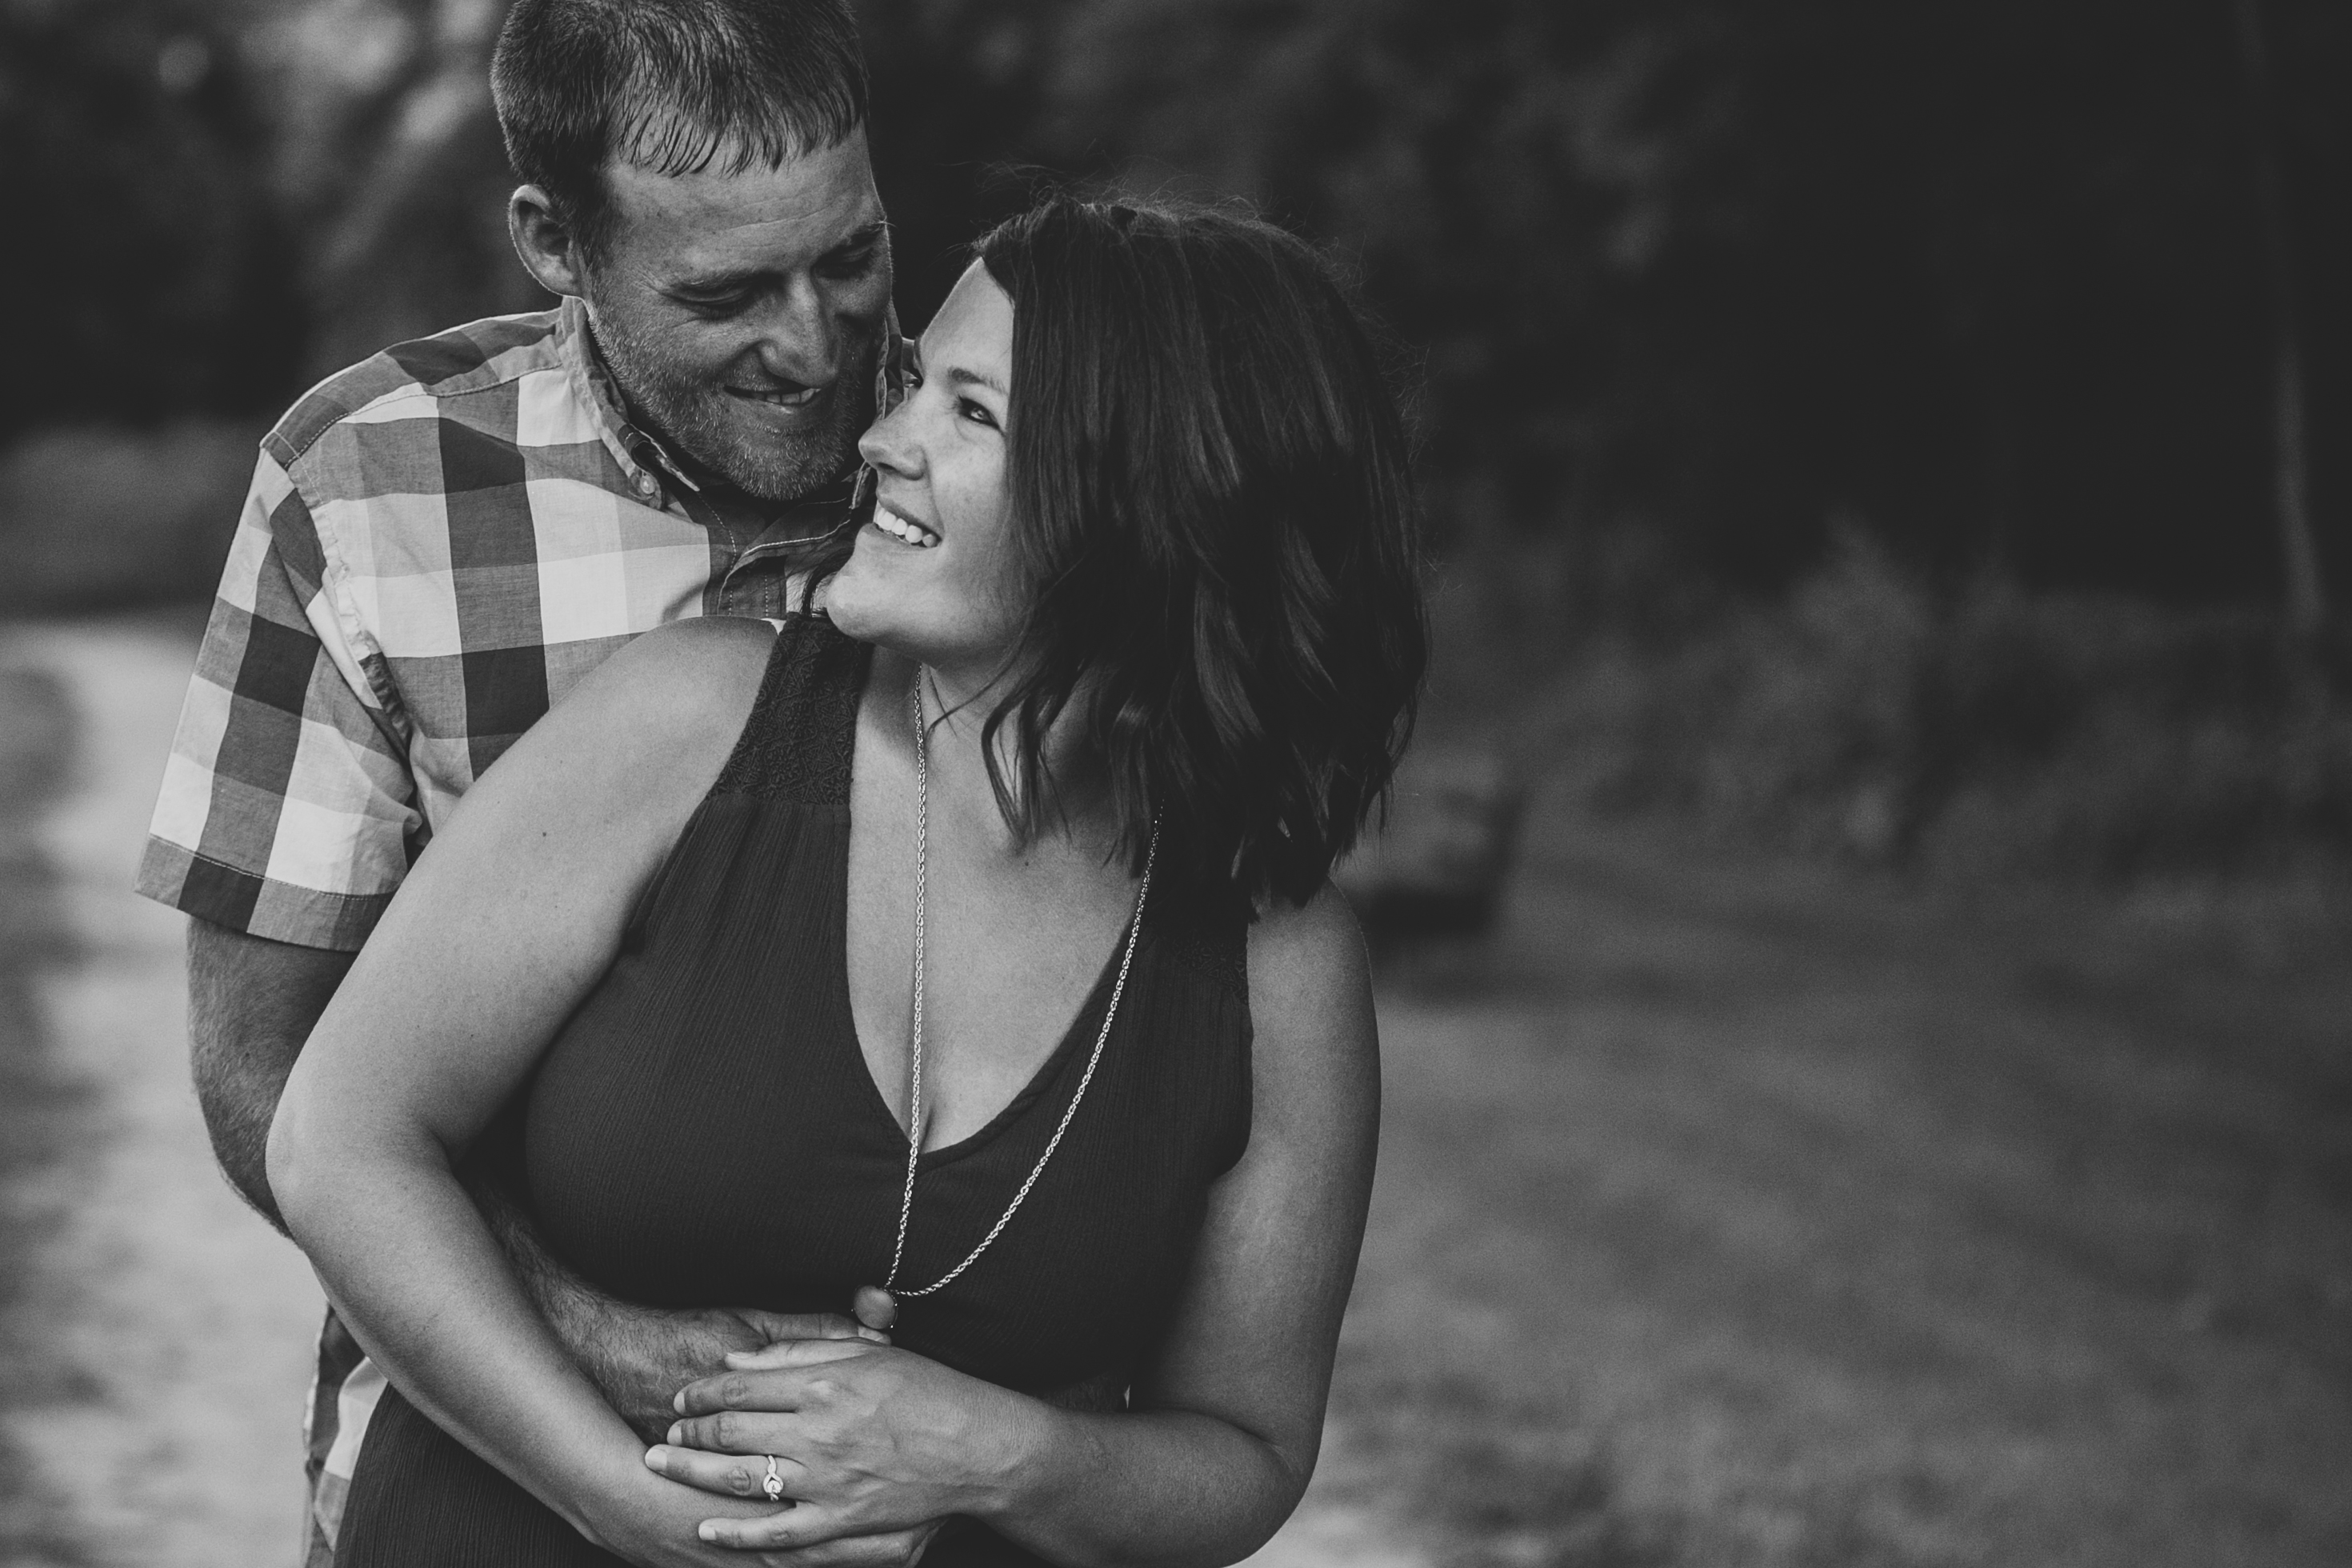 outdoor dubuque engagement session by catherine furlin photography, couple having fun